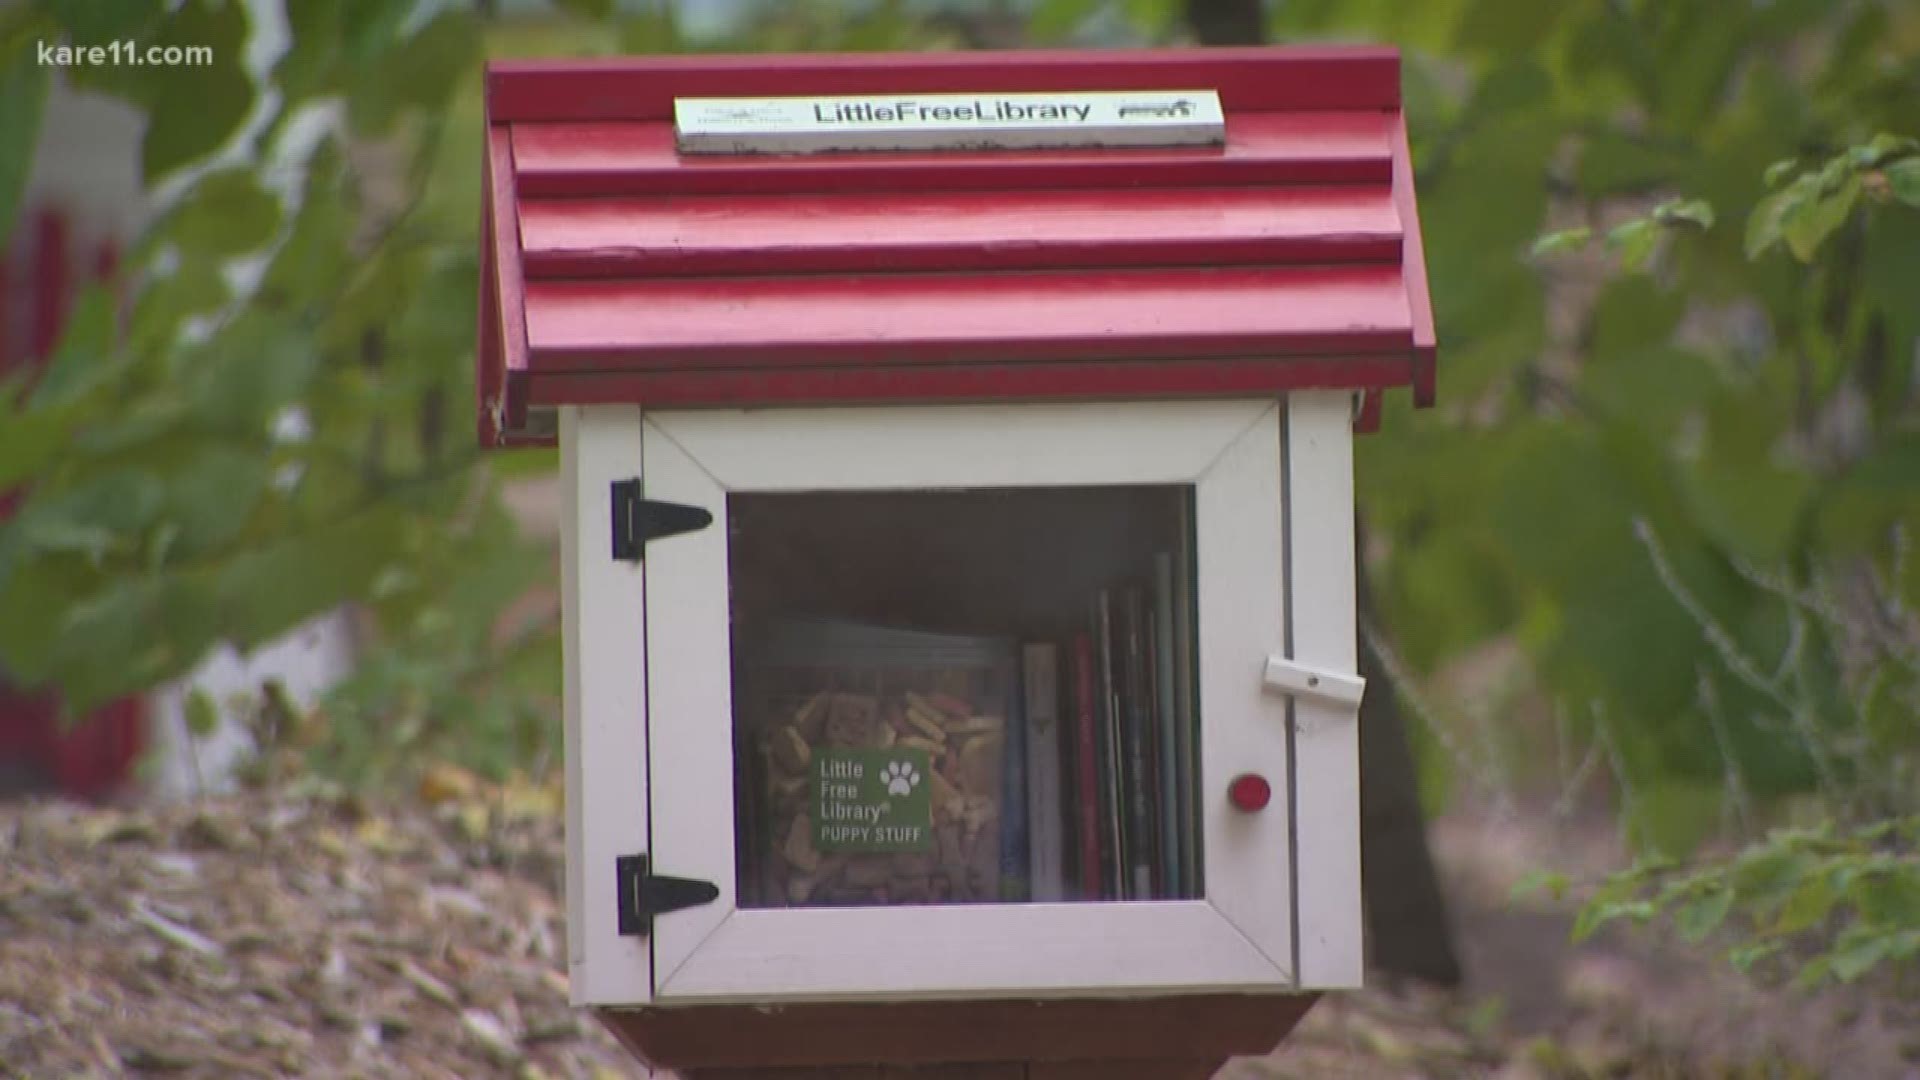 The Wisconsin man who started the Little Free Library movement died Thursday.